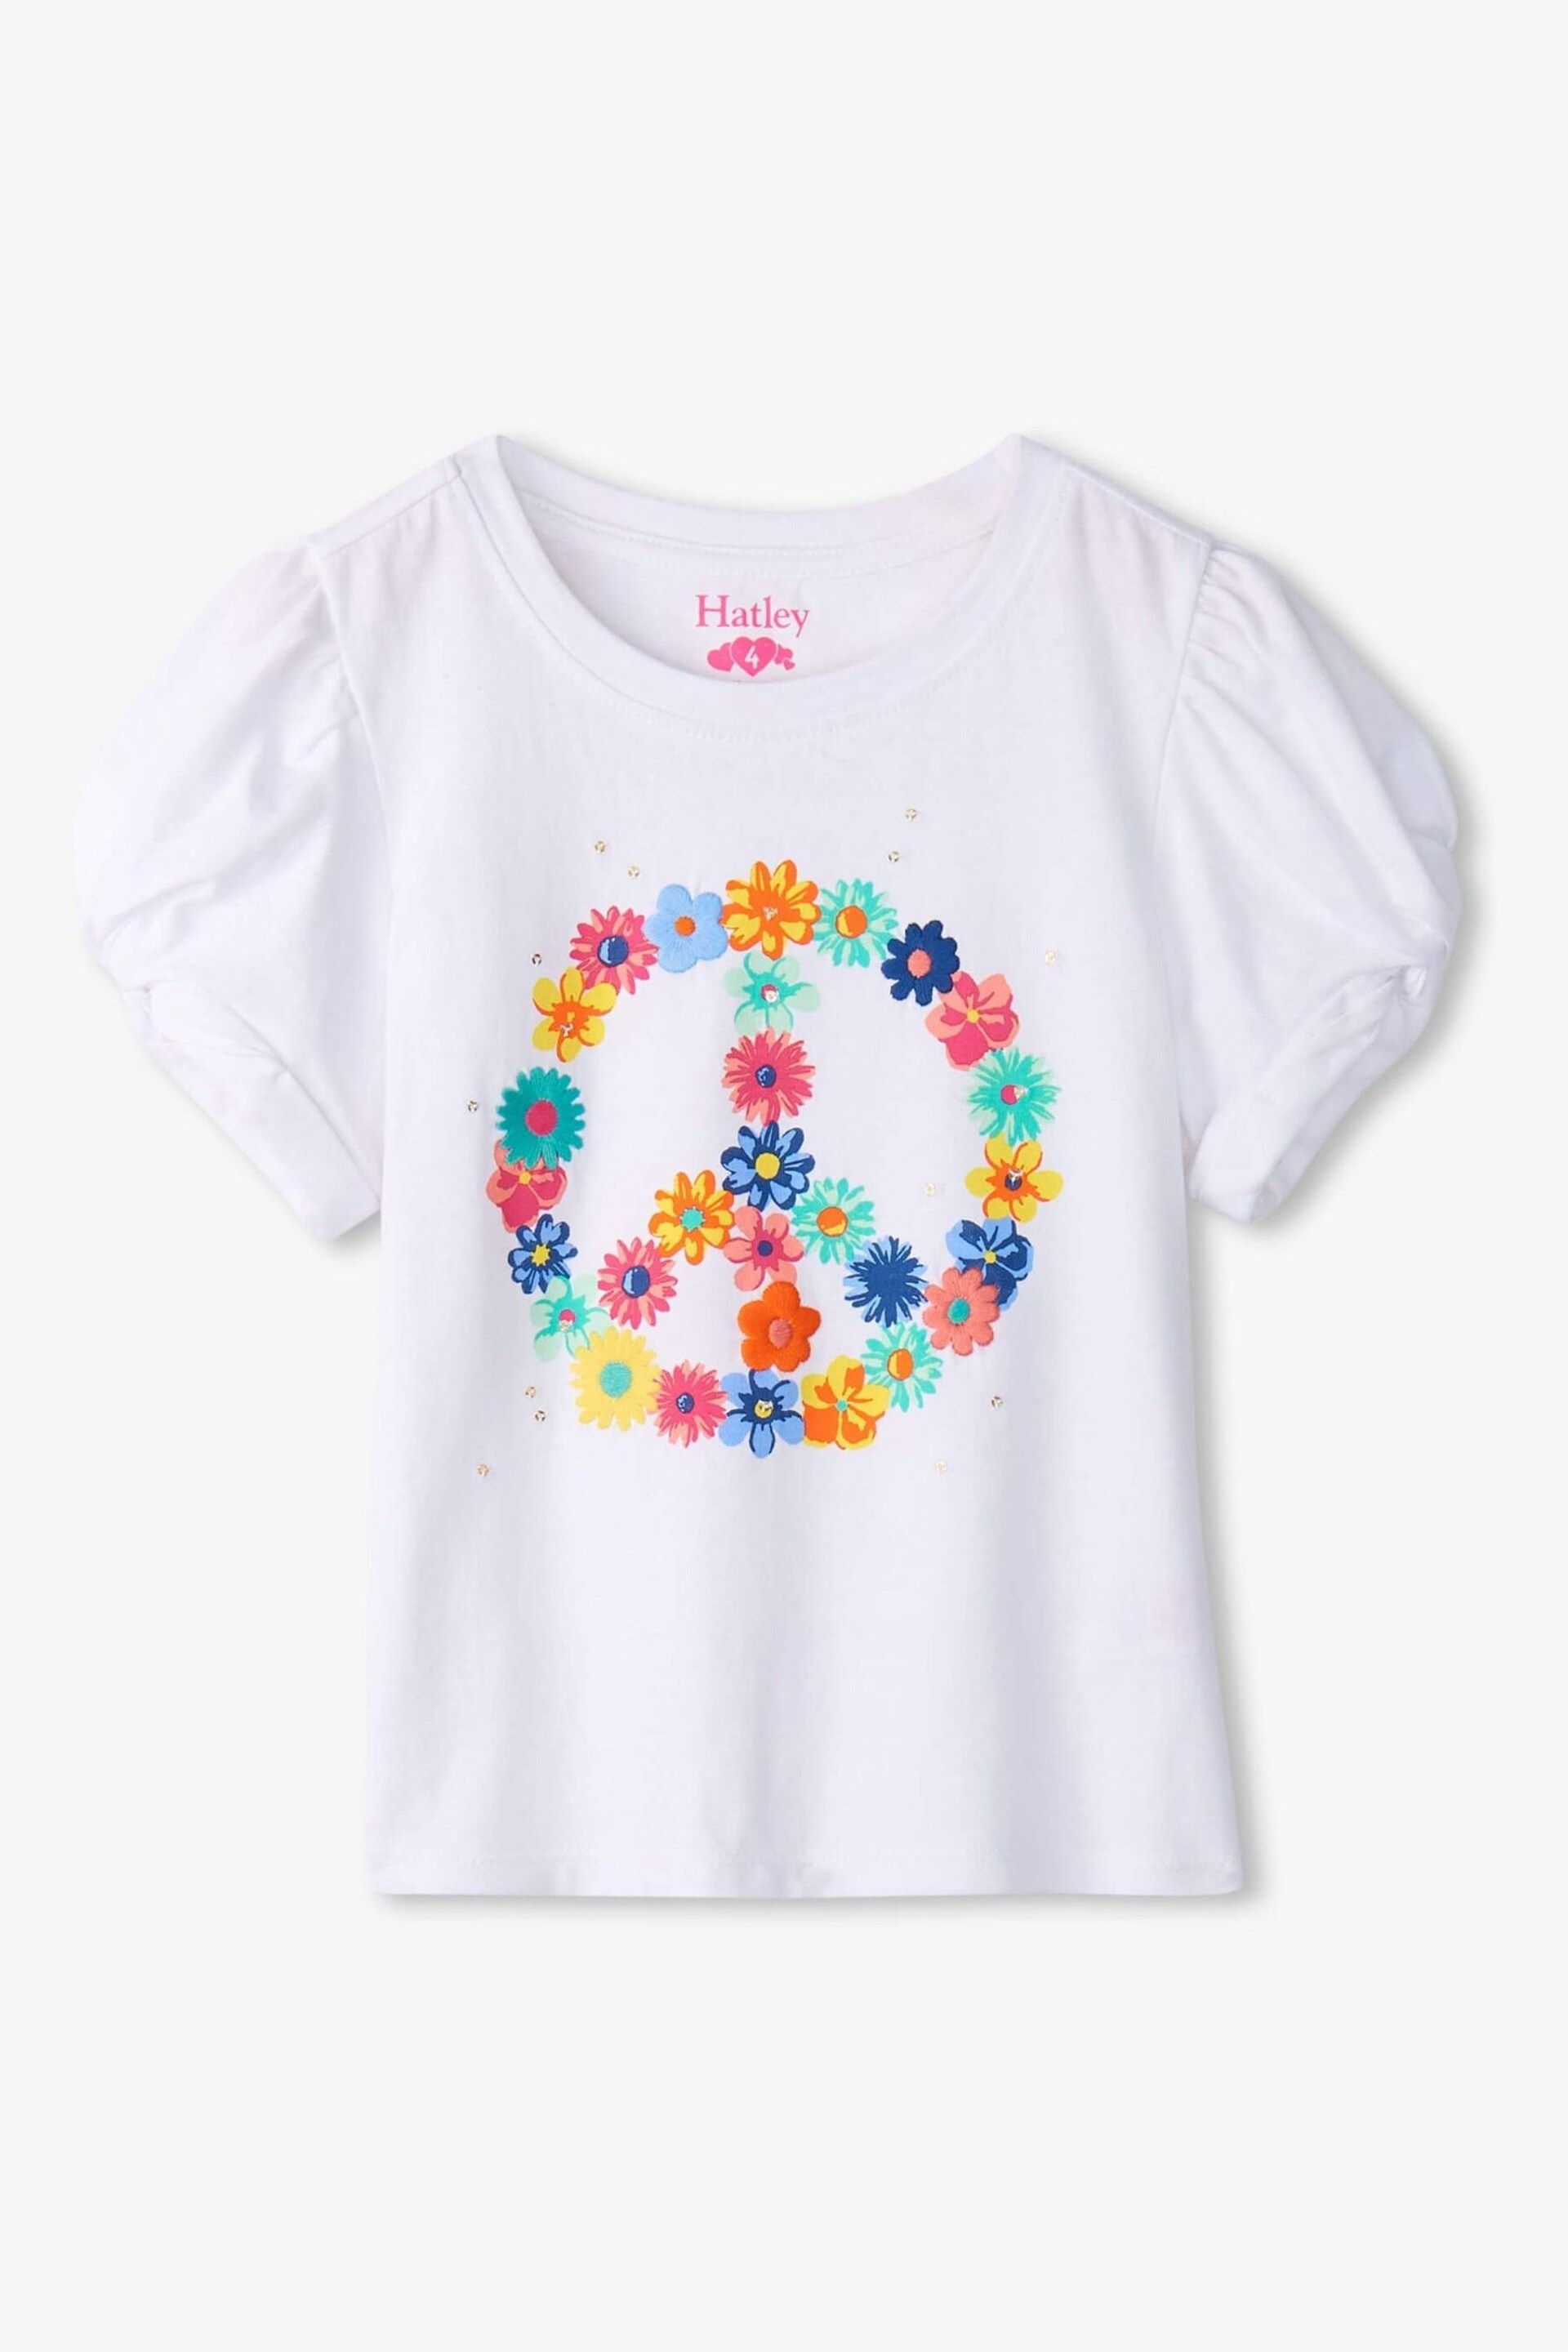 Hatley Peace Flower Twisted Sleeve T-Shirt - Image 1 of 5